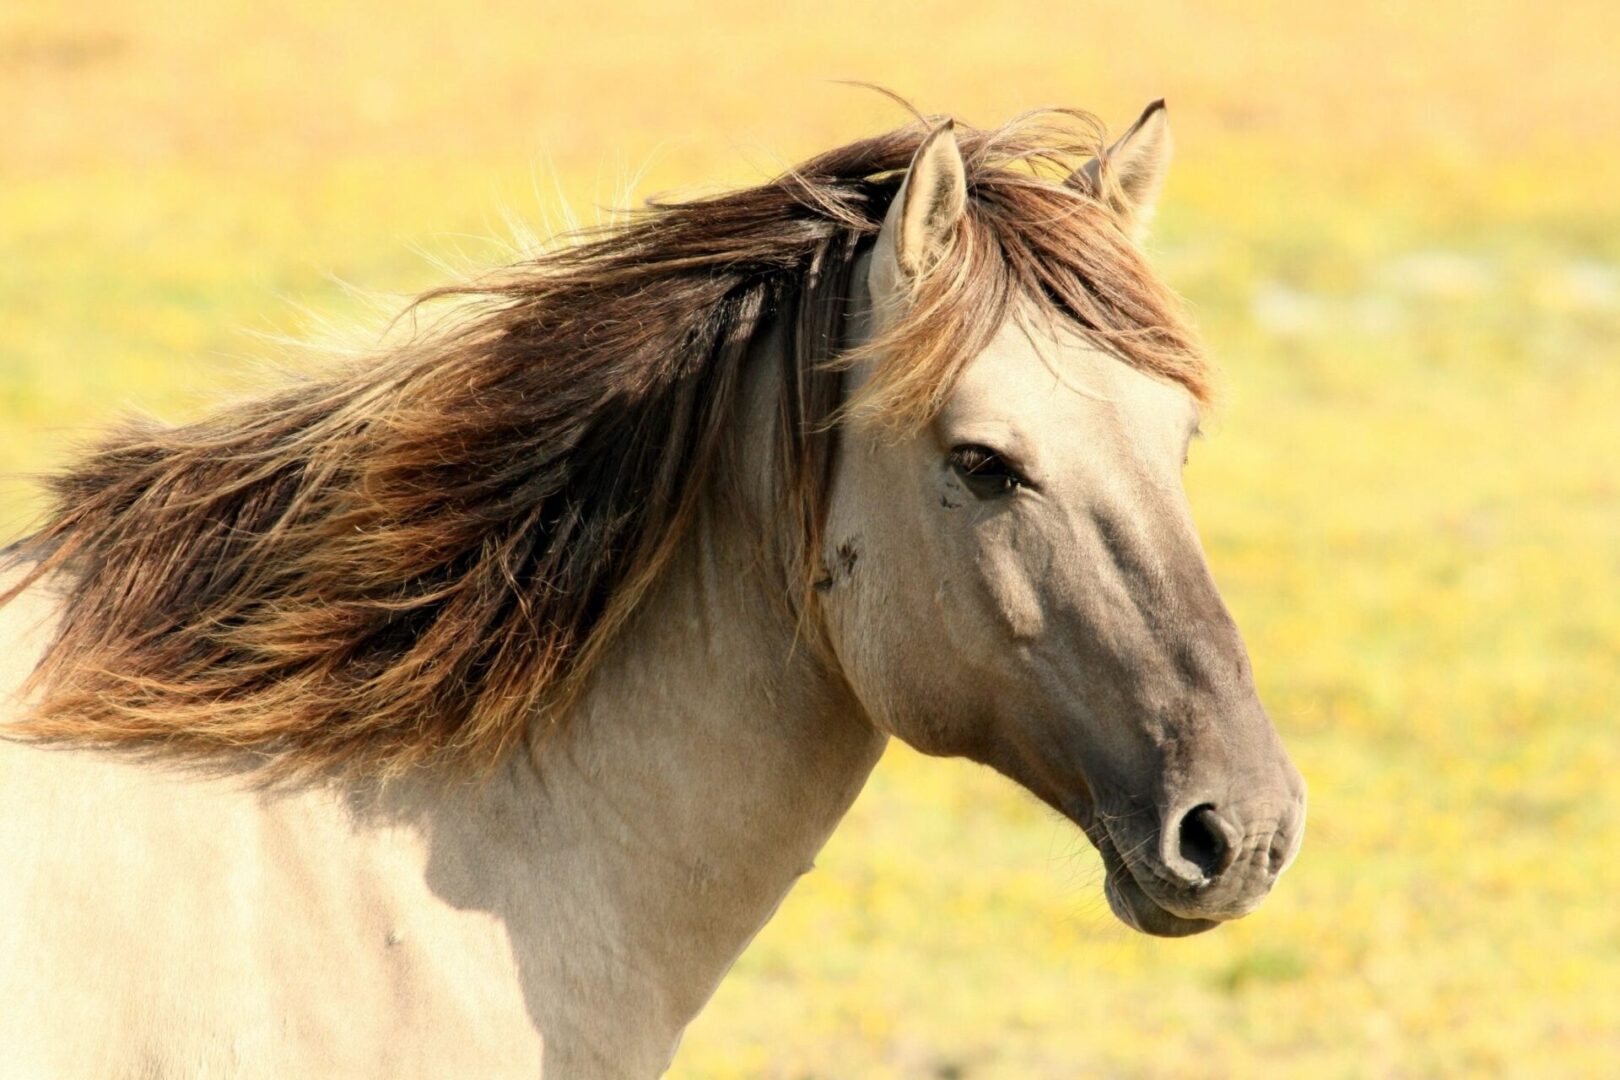 A Brown Color Horse in the Meddle of the Field